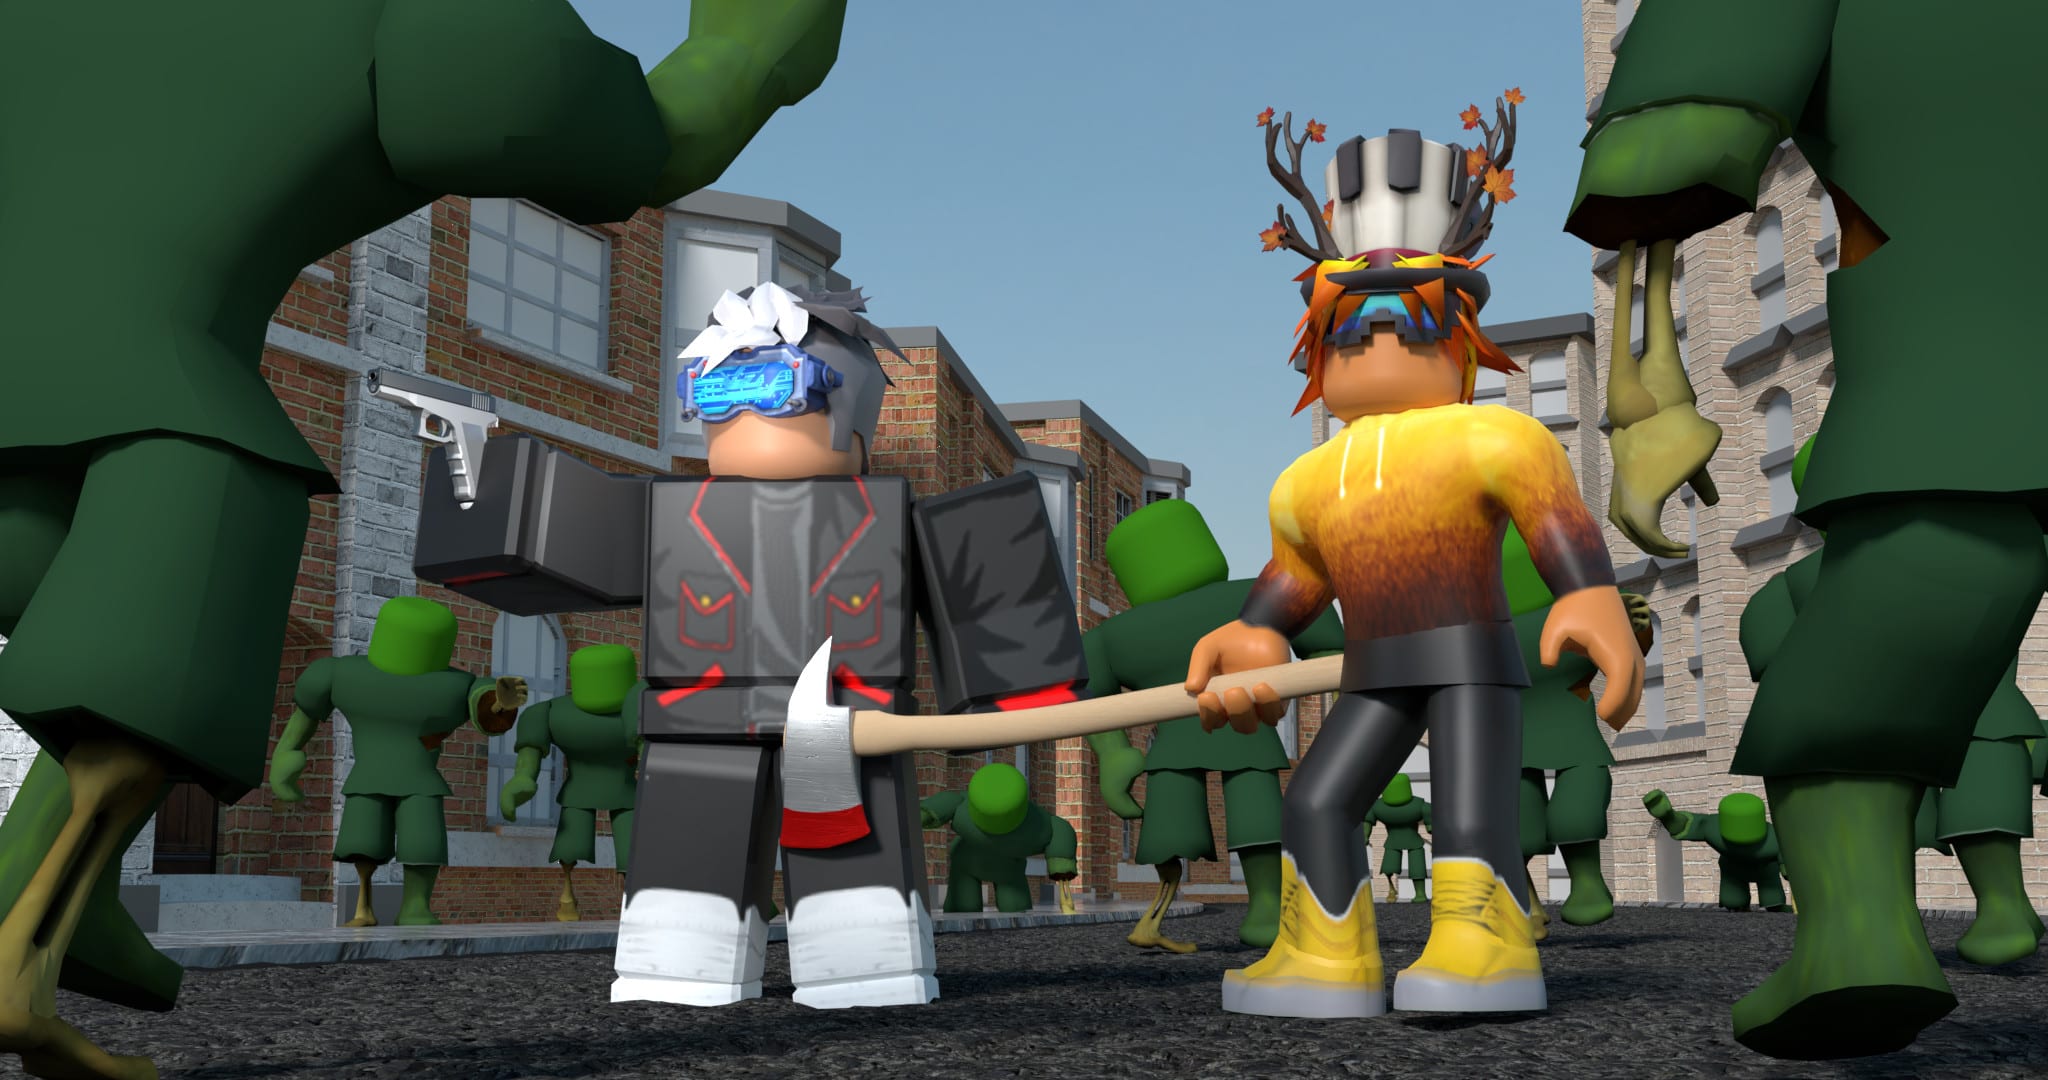 Create Blender Render For Your Roblox Avatar By Abhimanyu Bagga Fiverr - how to render roblox characters in blender